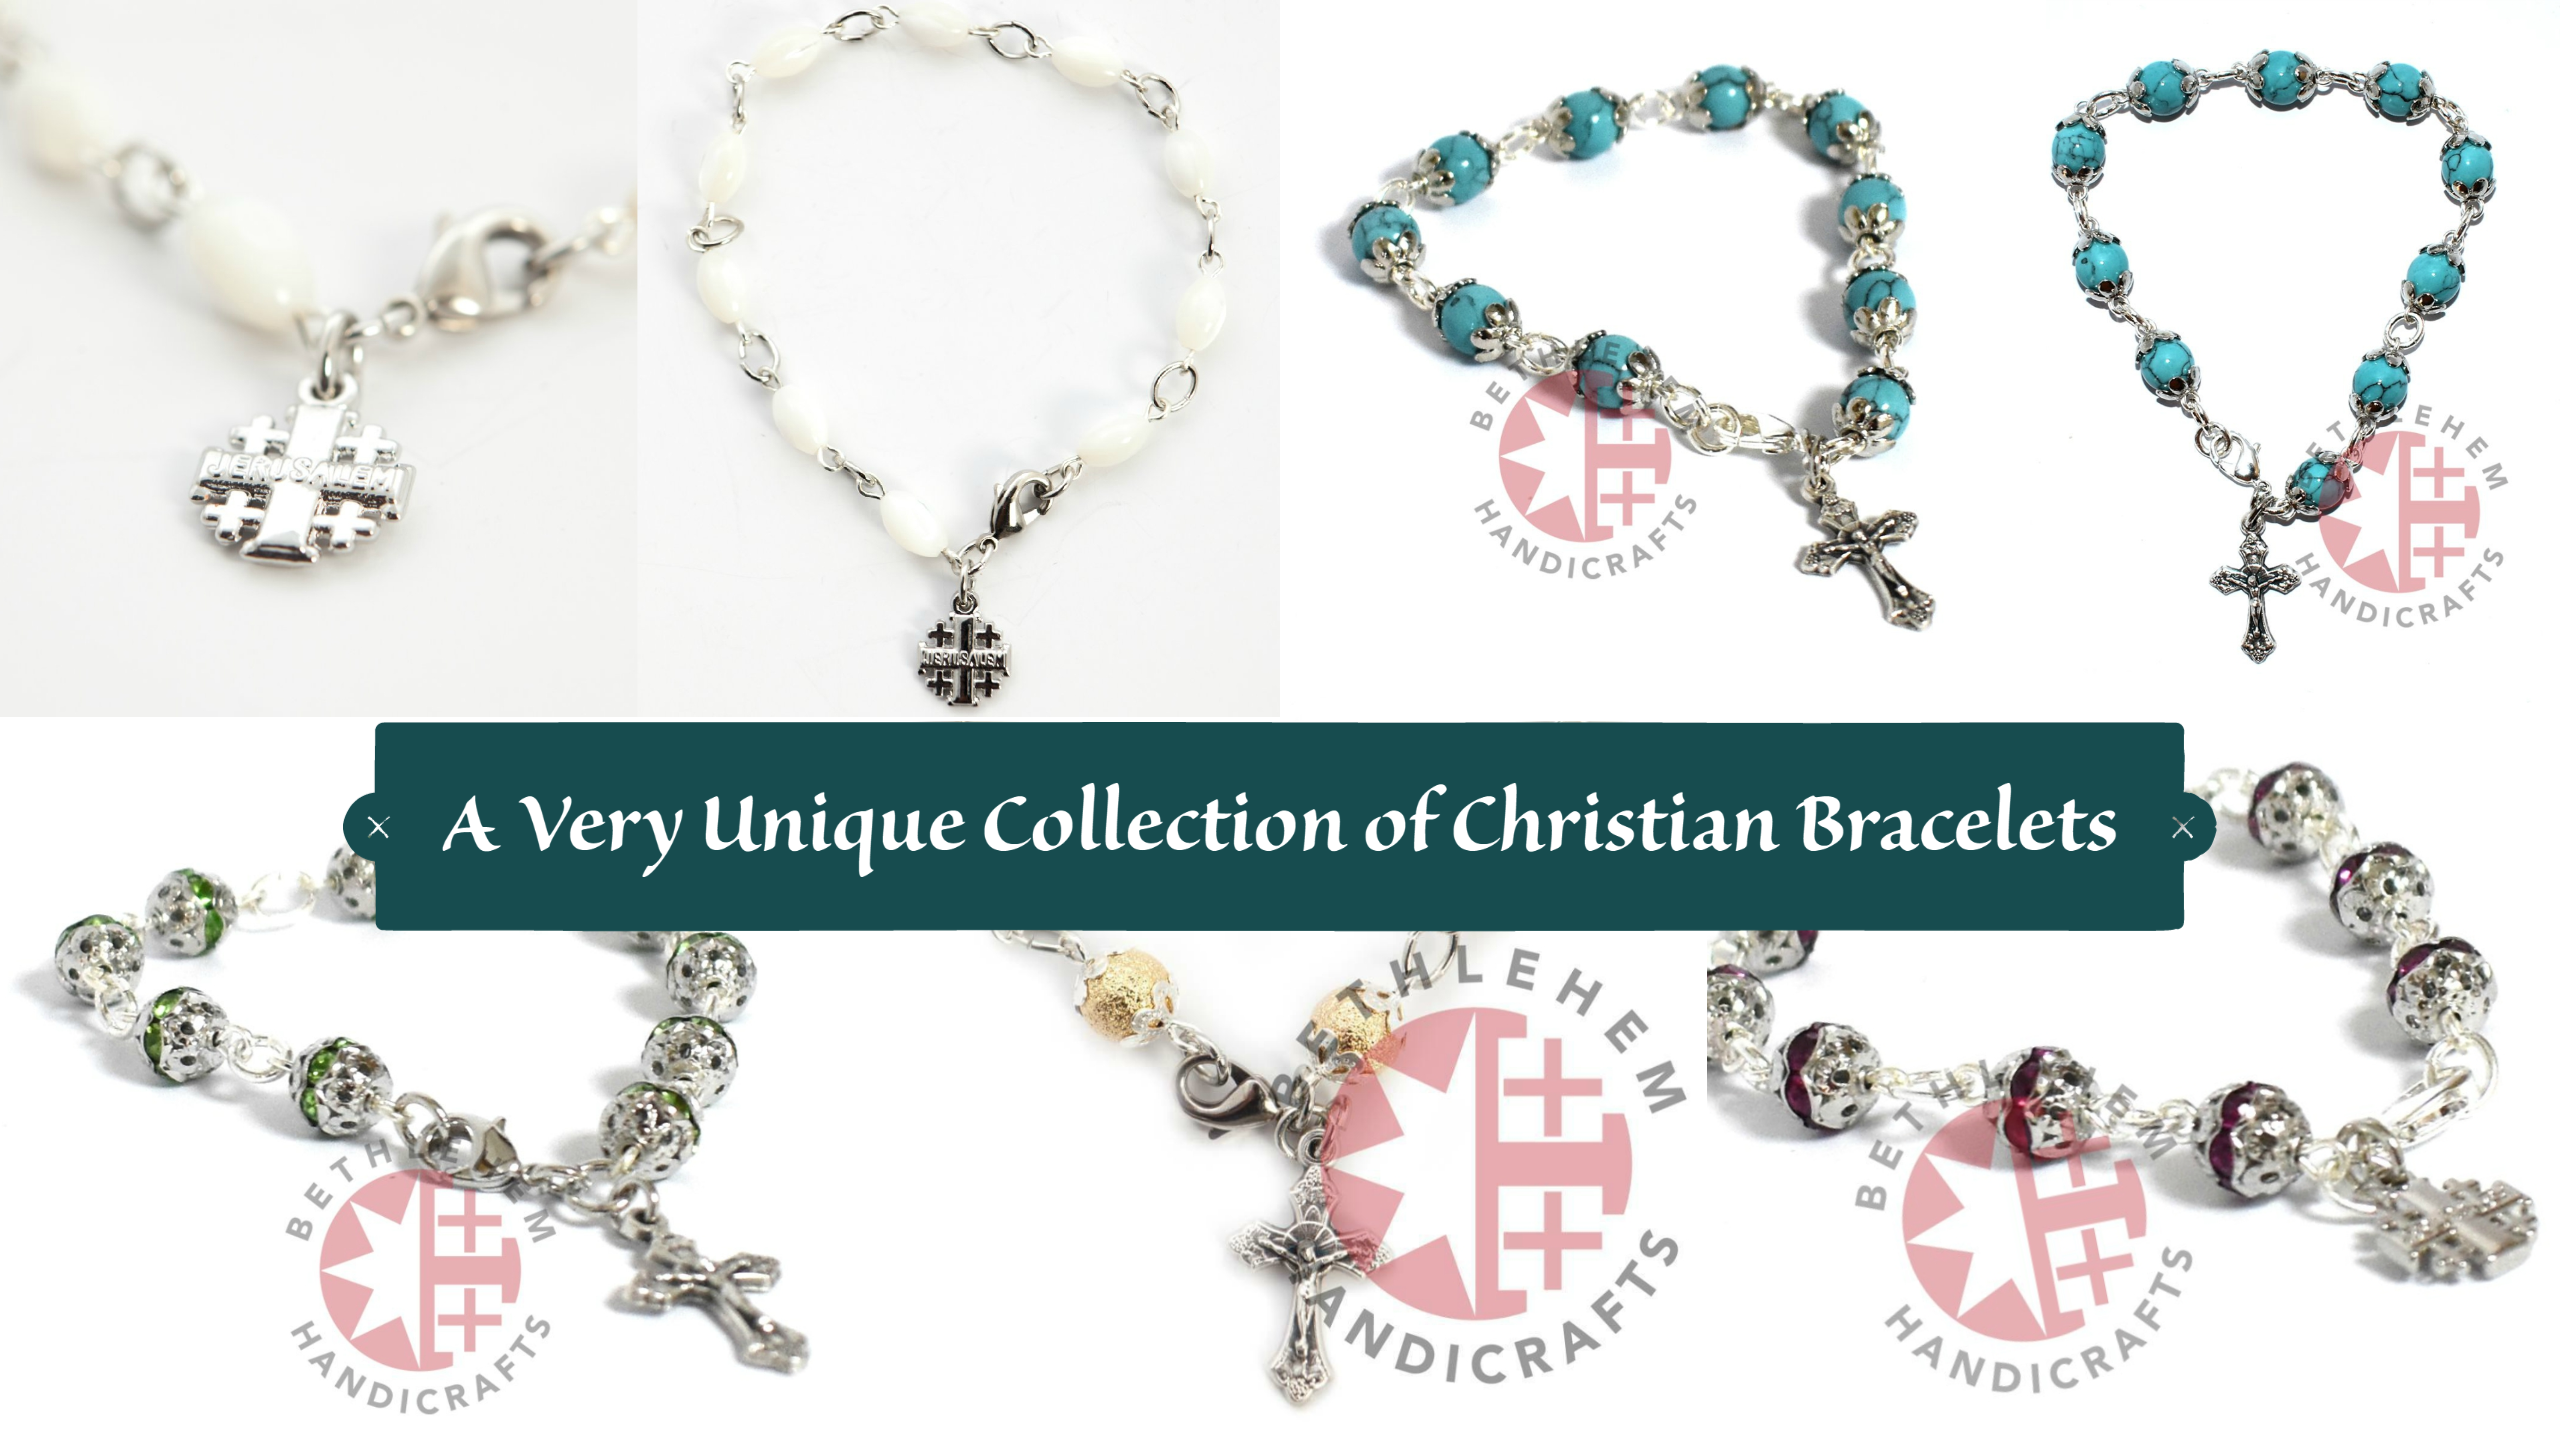 A Very Unique Collection of Christian Bracelets